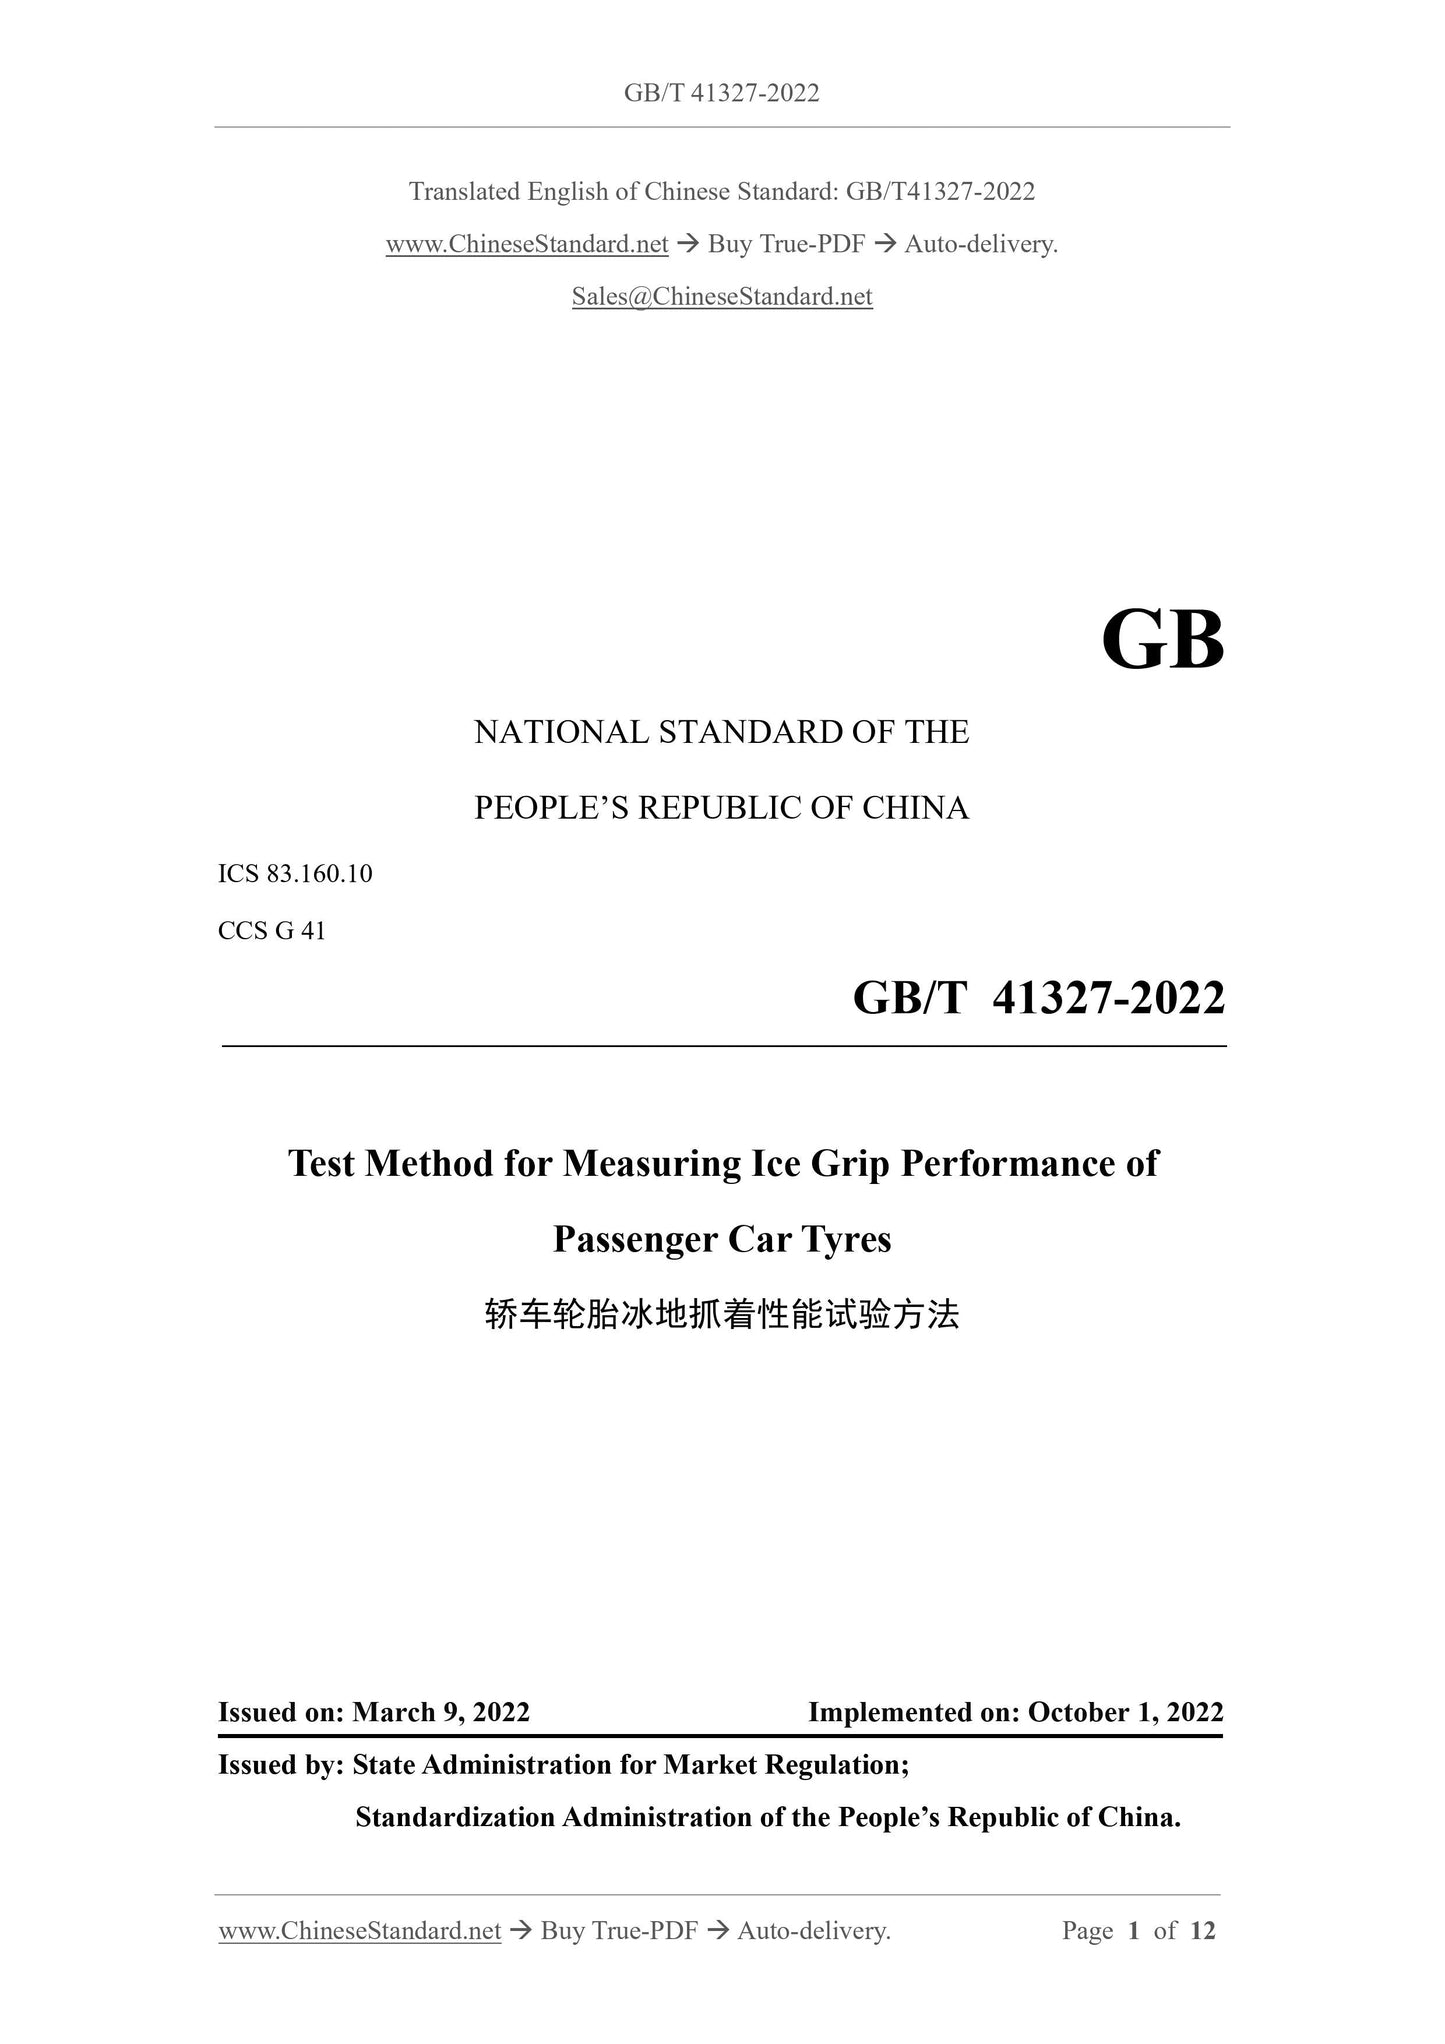 GB/T 41327-2022 Page 1